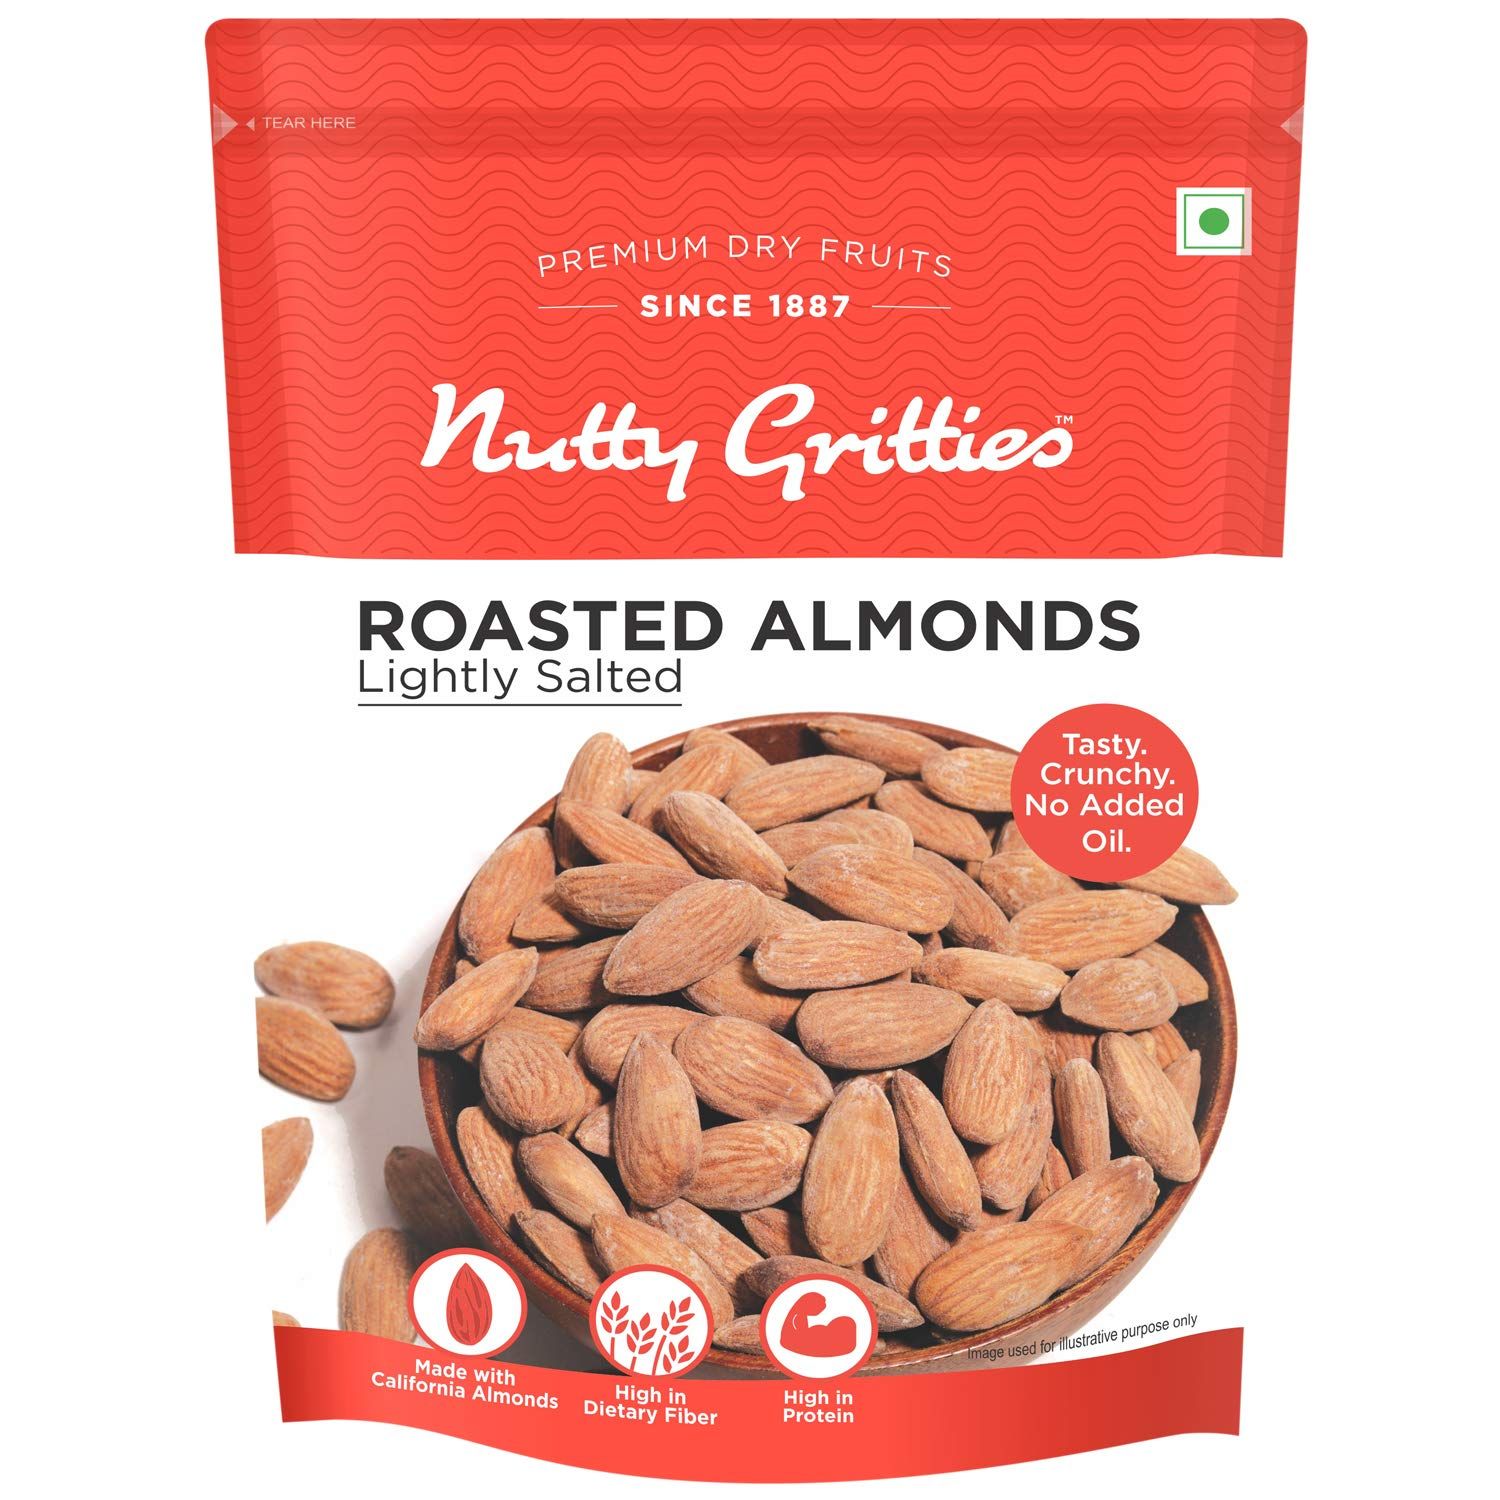 Nutty Gritties Roasted Almonds Image